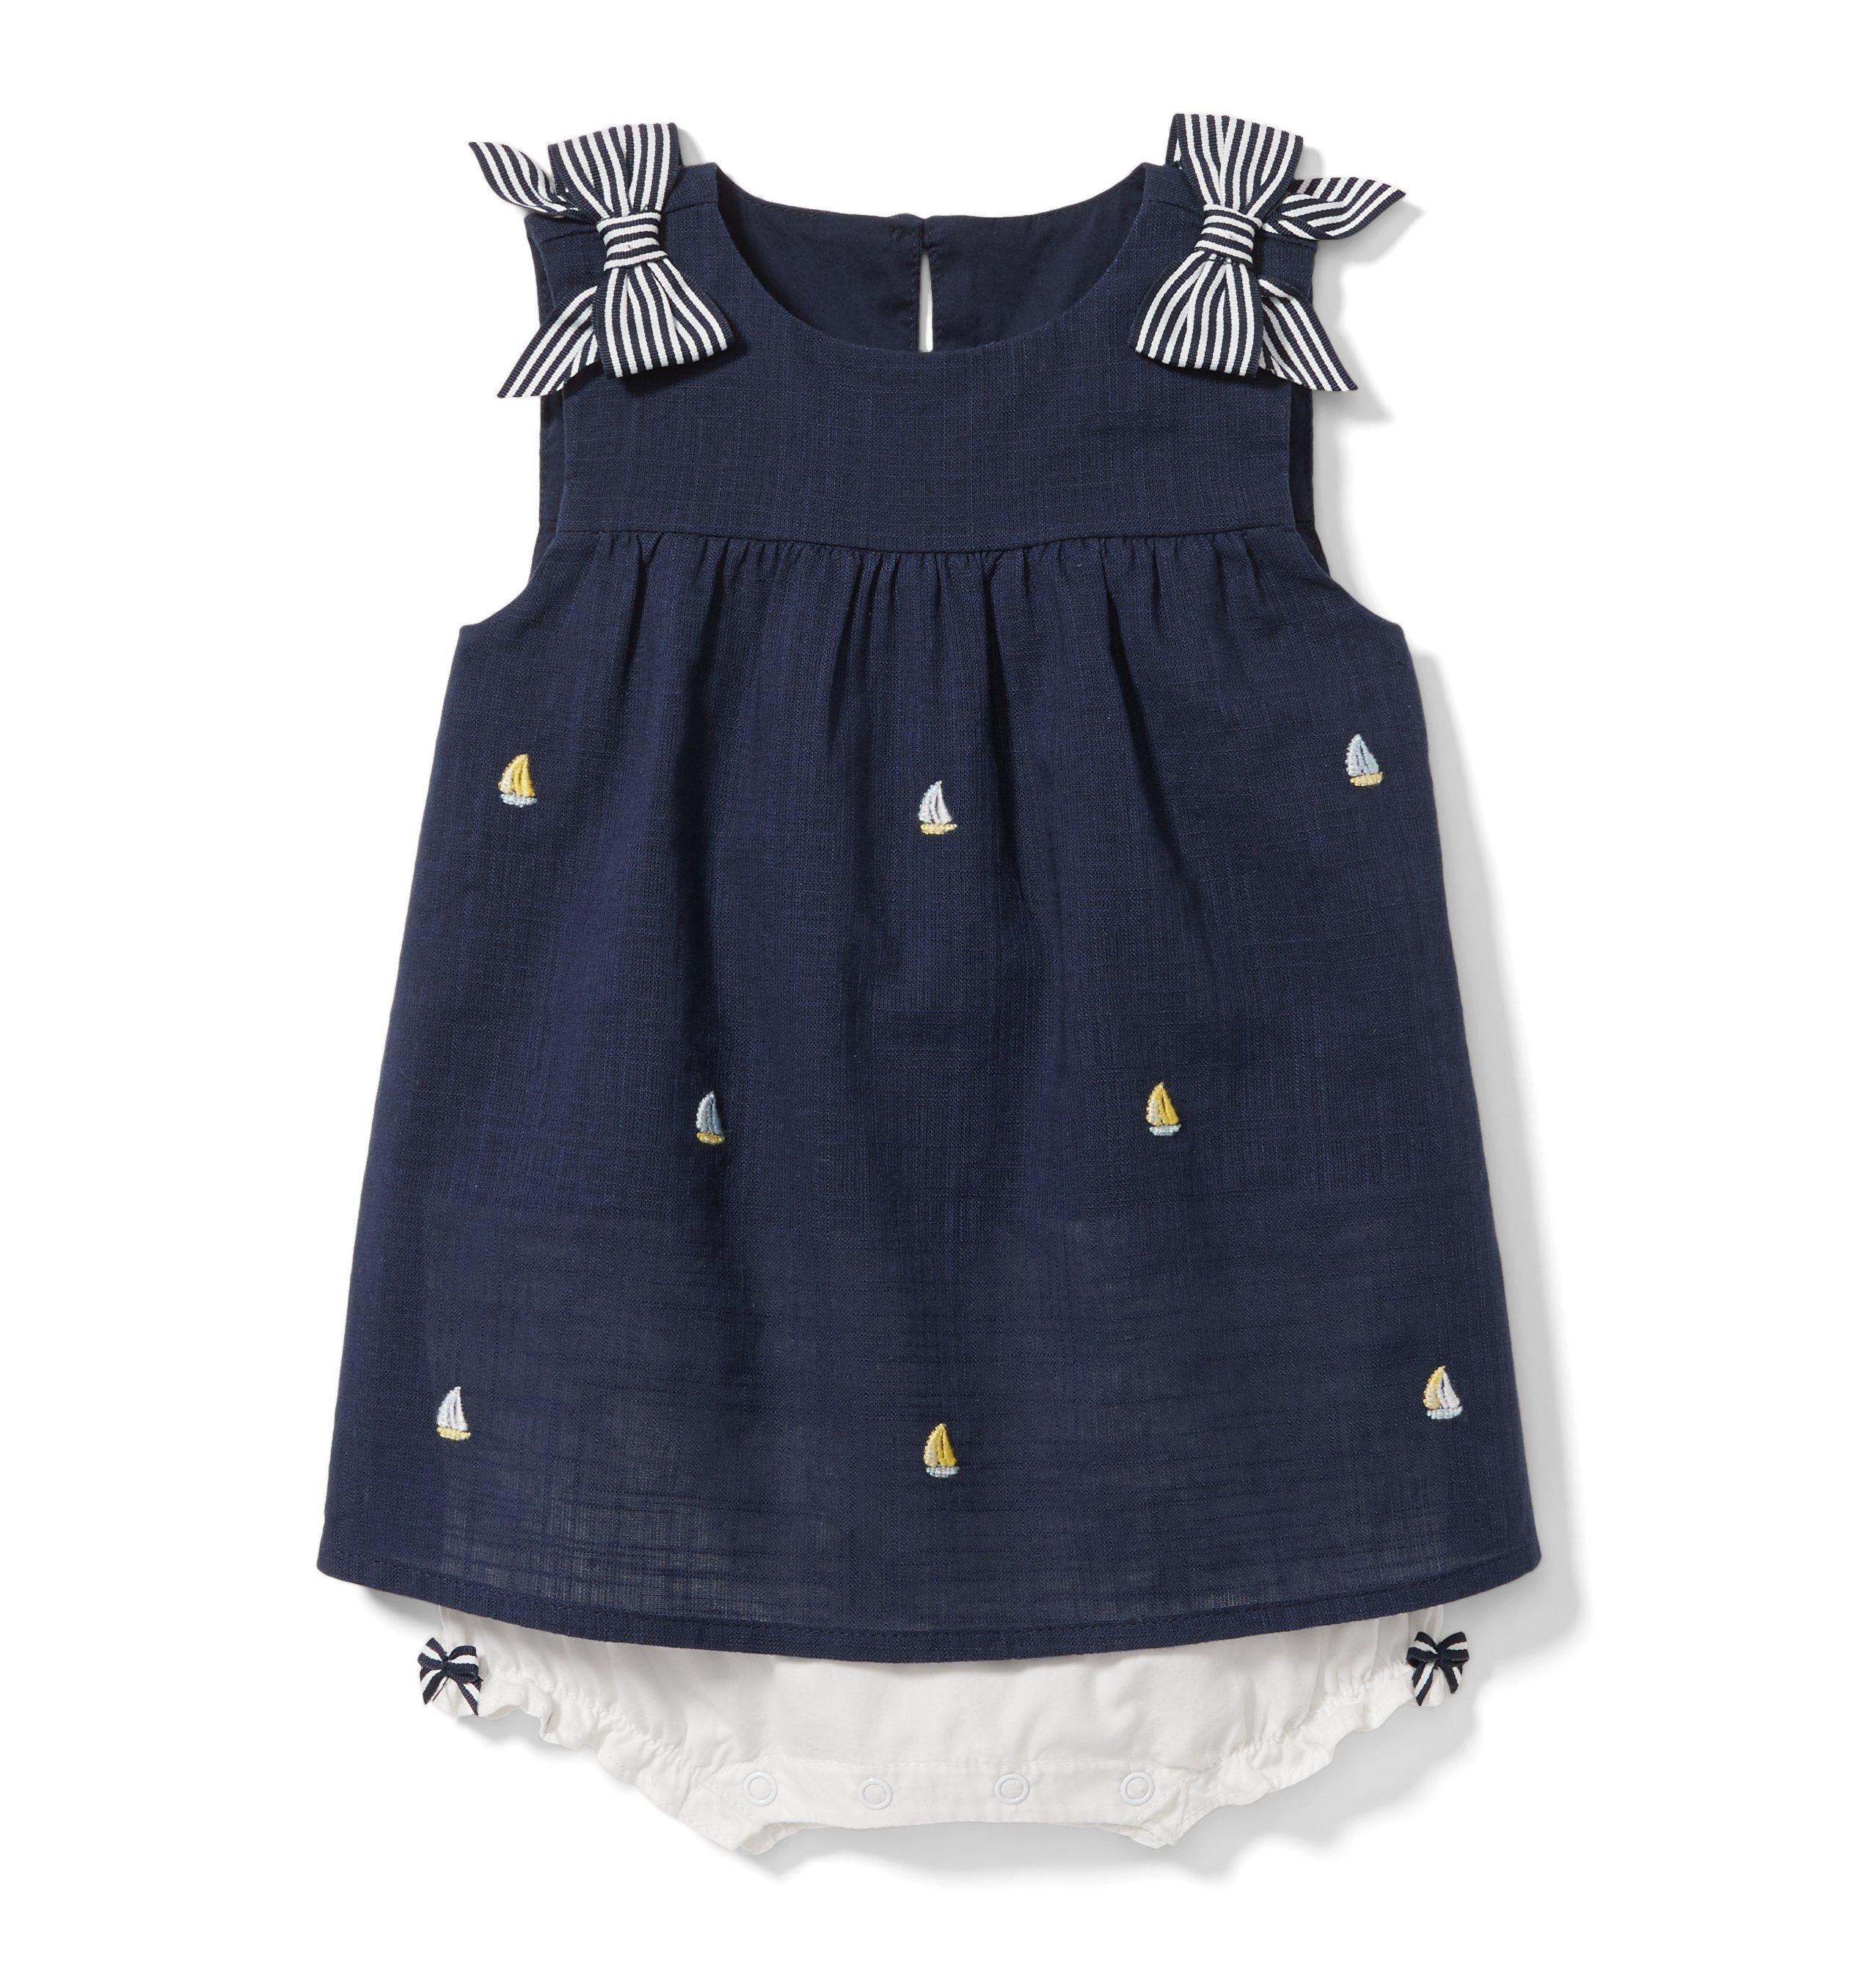 Embroidered Sailboat Dress 1-Piece 